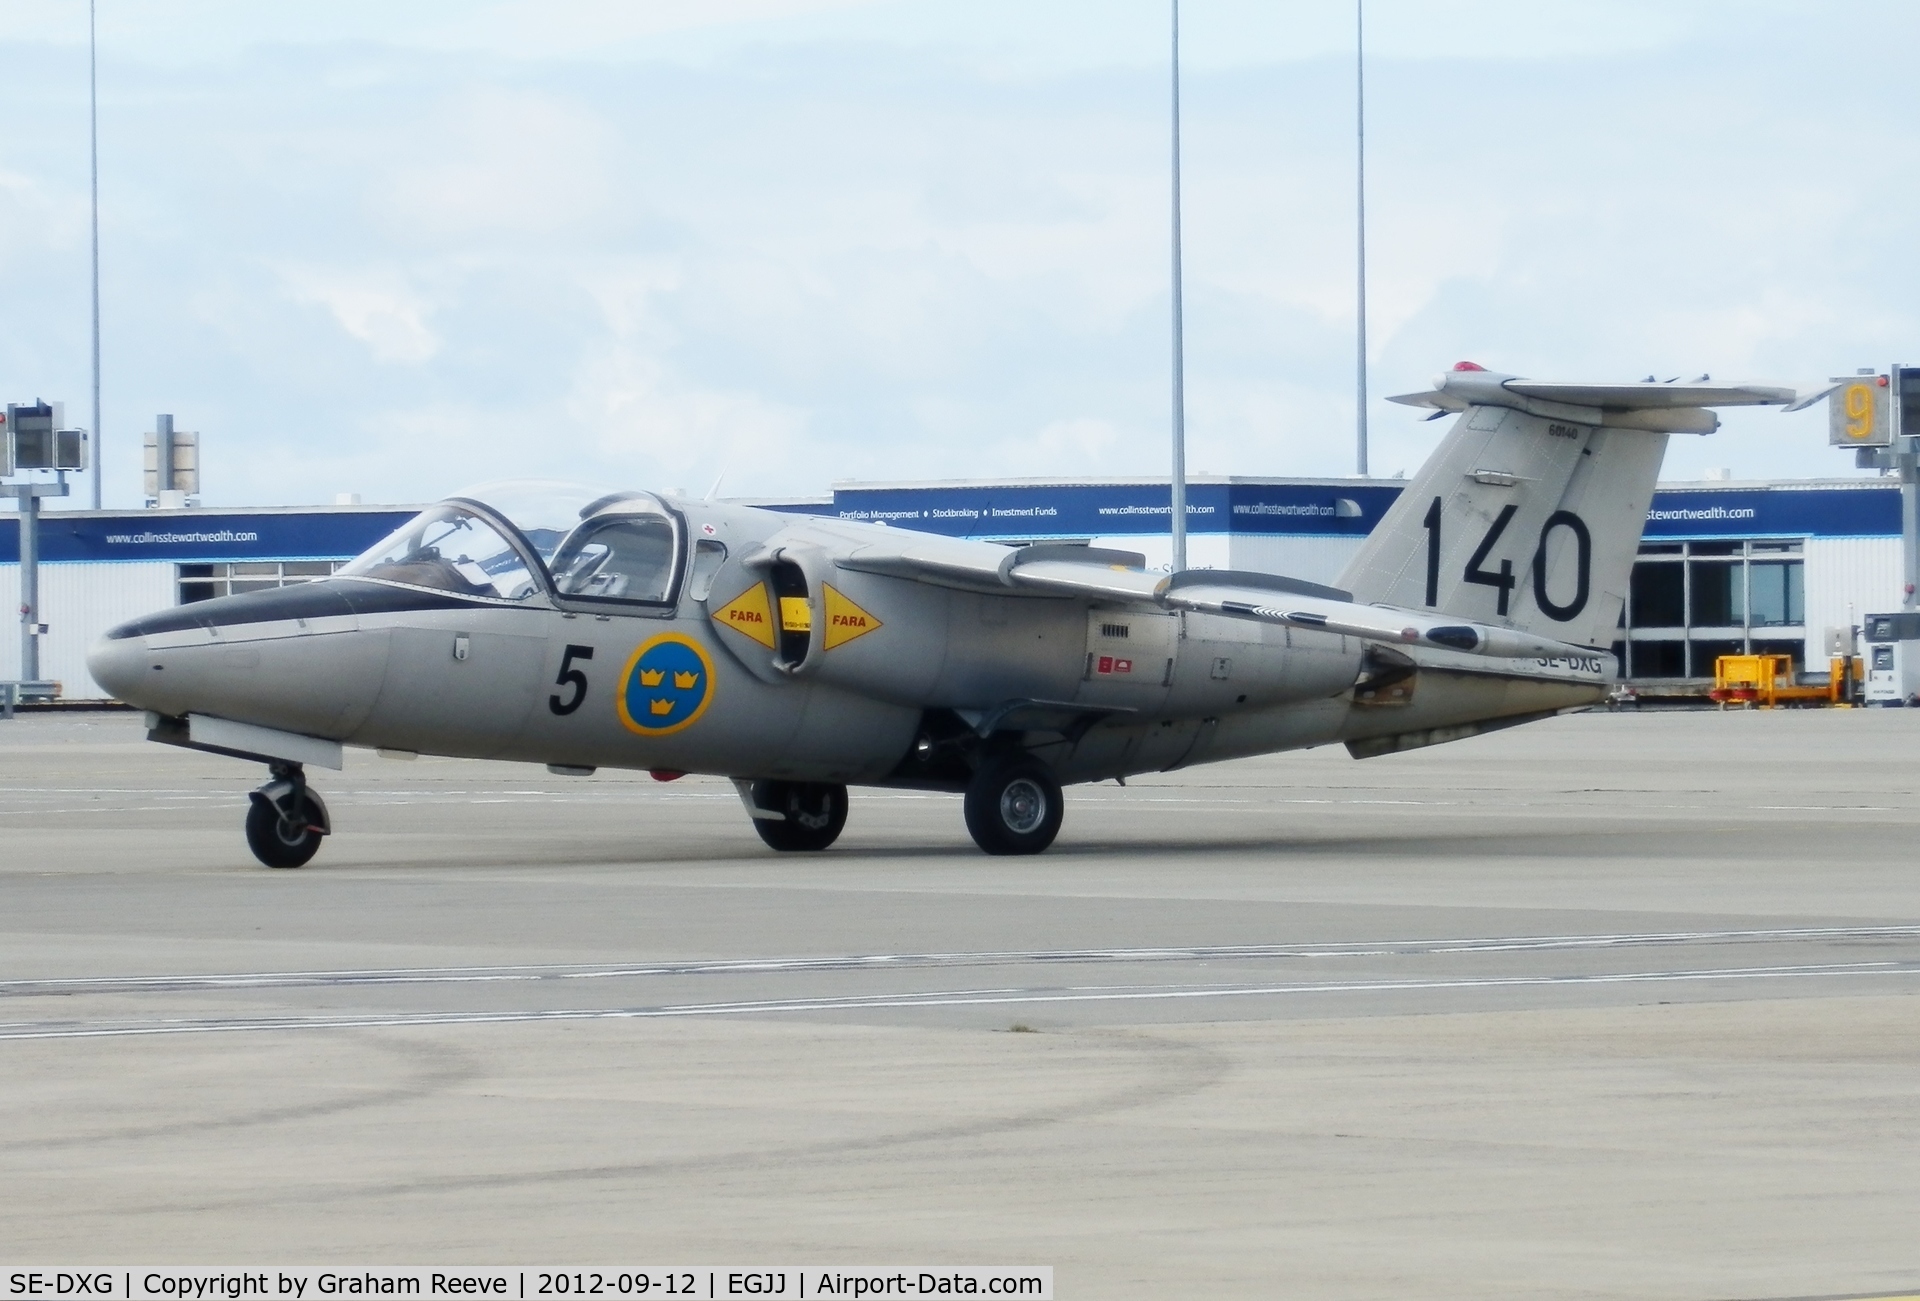 SE-DXG, 1968 Saab Sk60E C/N 60-140, Parked ready for the Air Show.